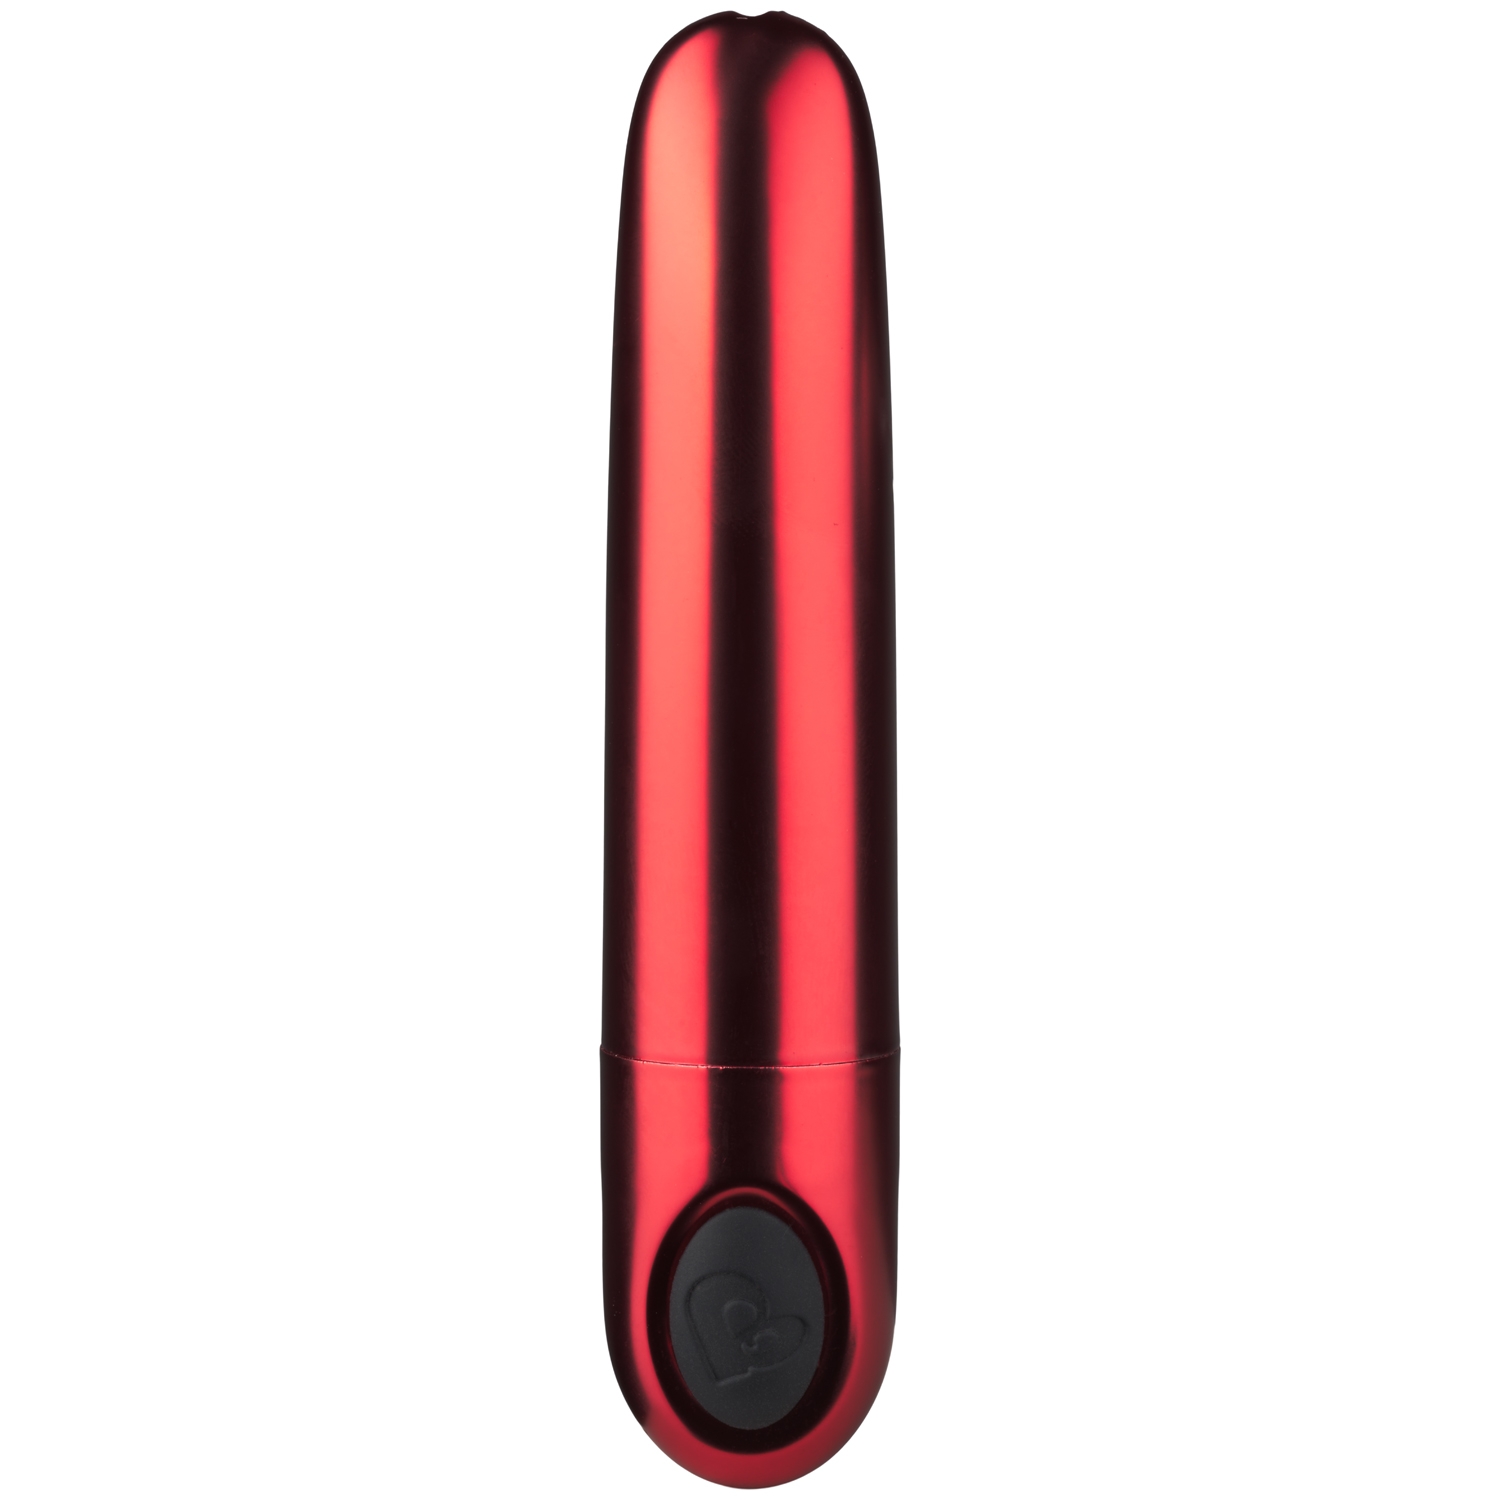 Rocks Off Truly Yours Ruby Caress Bullet Vibrator - Red